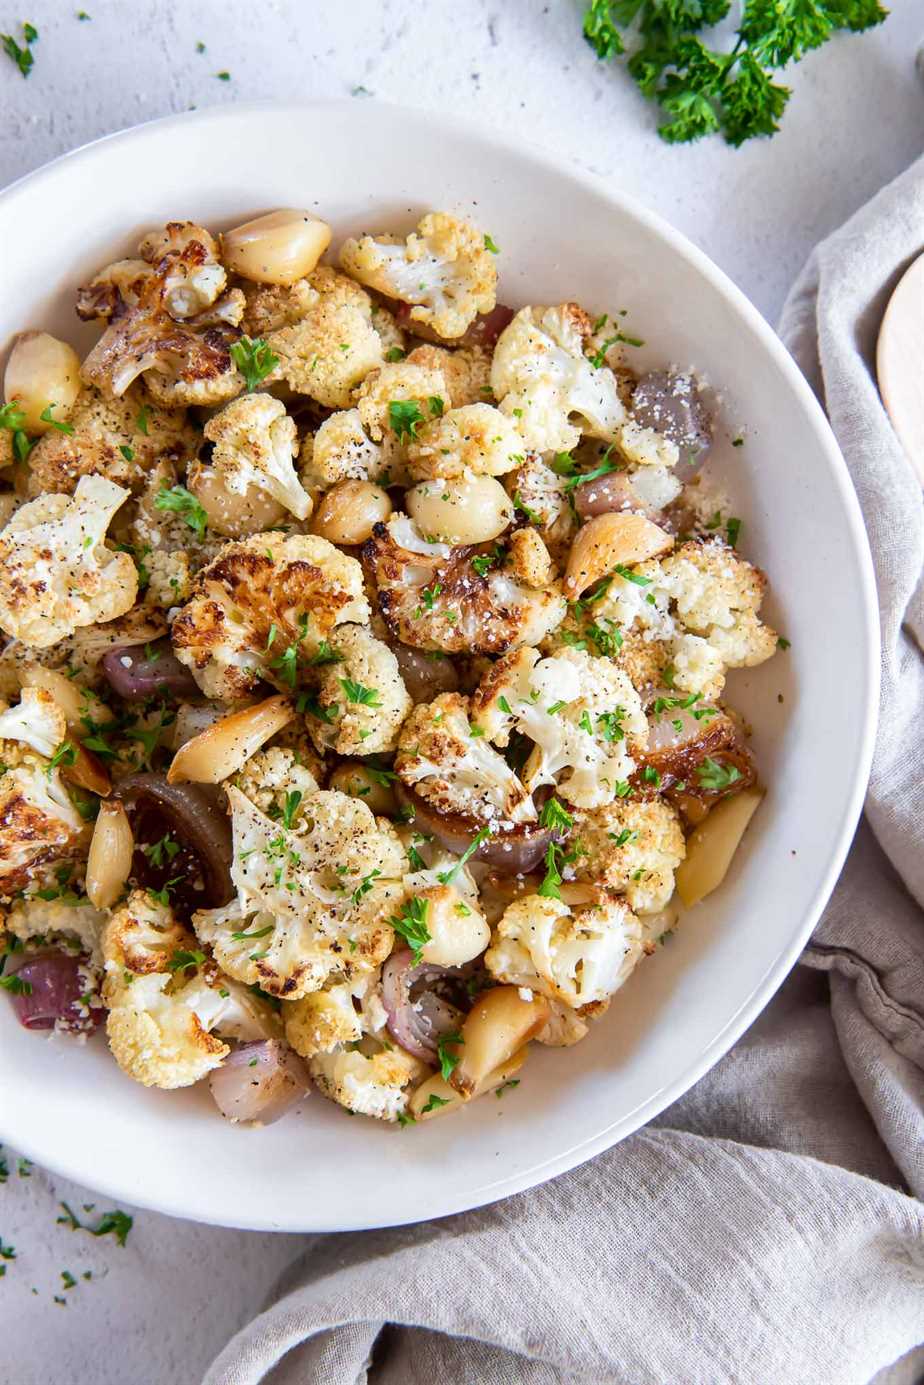 Roasted cauliflower in a white bowl